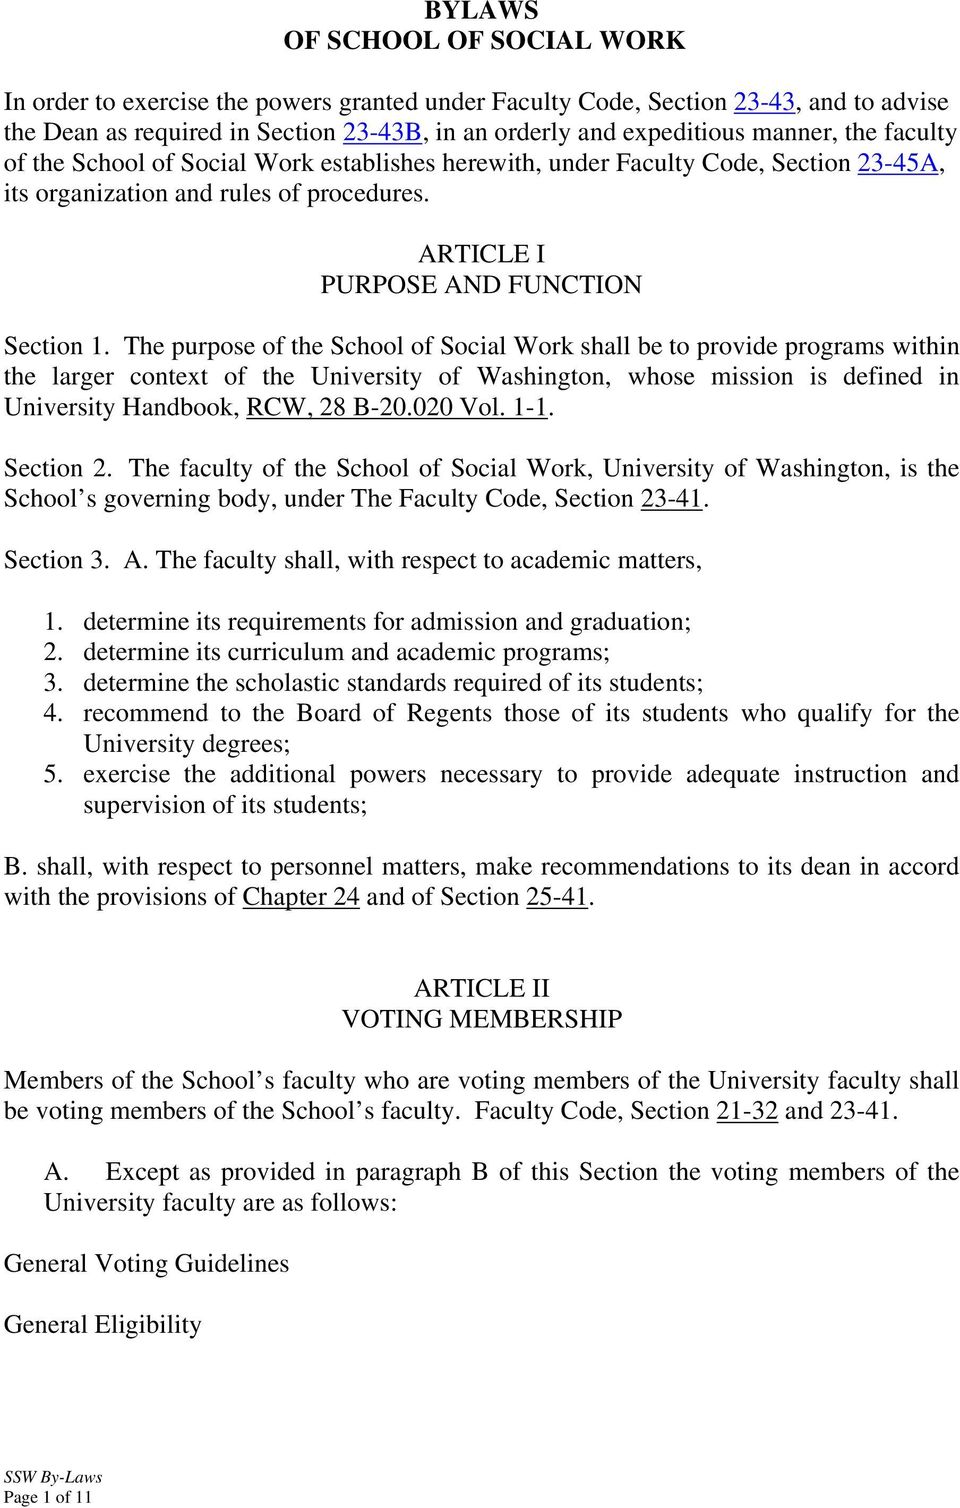 The purpose of the School of Social Work shall be to provide programs within the larger context of the University of Washington, whose mission is defined in University Handbook, RCW, 28 B-20.020 Vol.